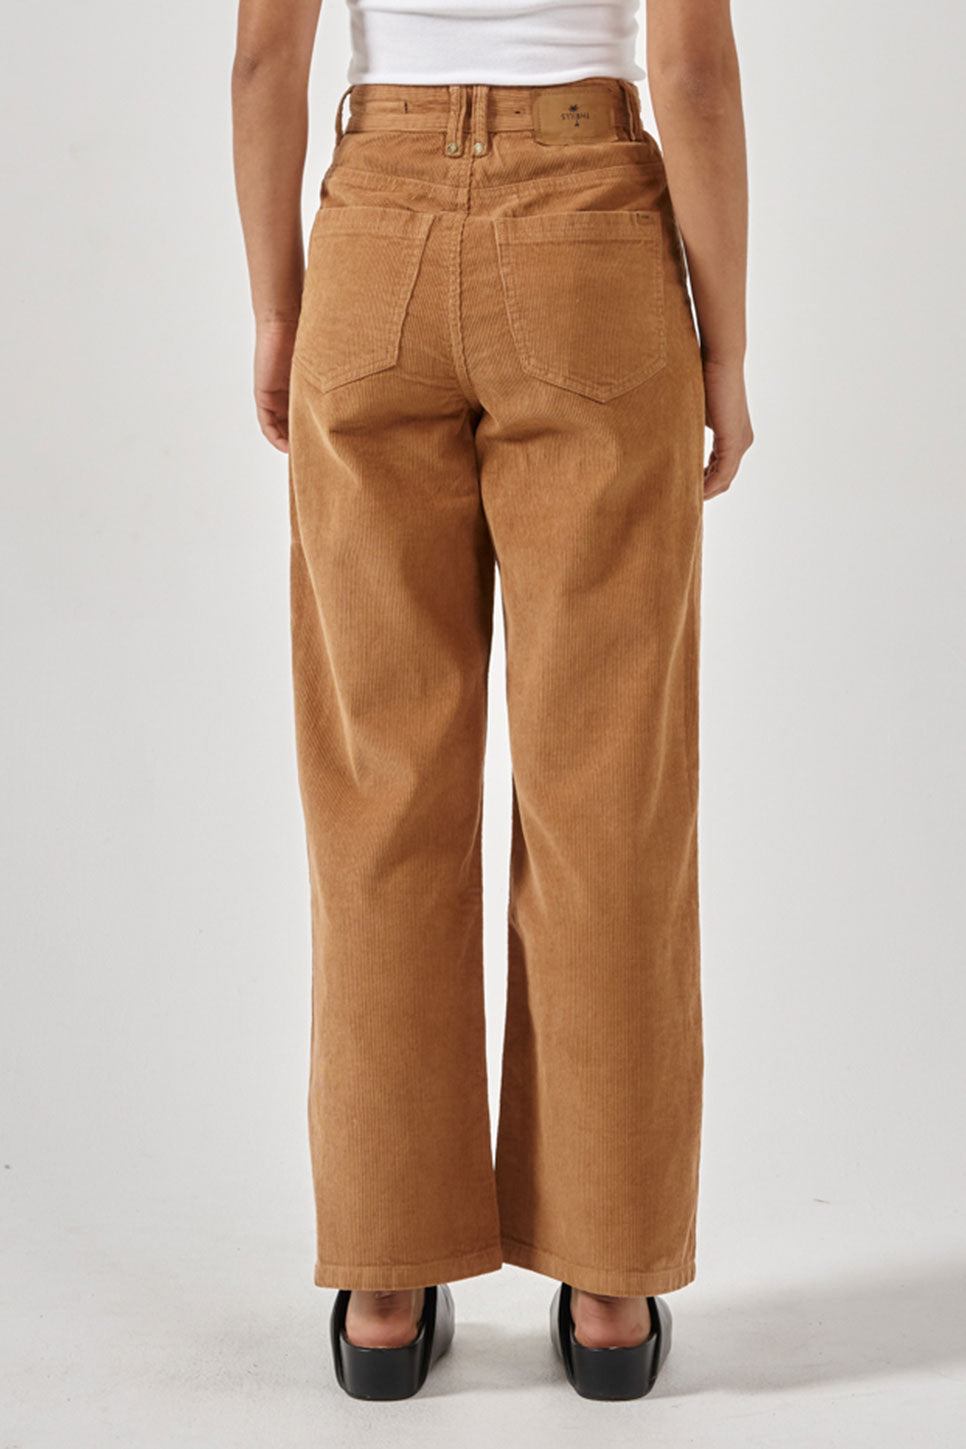 Thrills - Holly Cord Pant - Faded Tobacco - Back